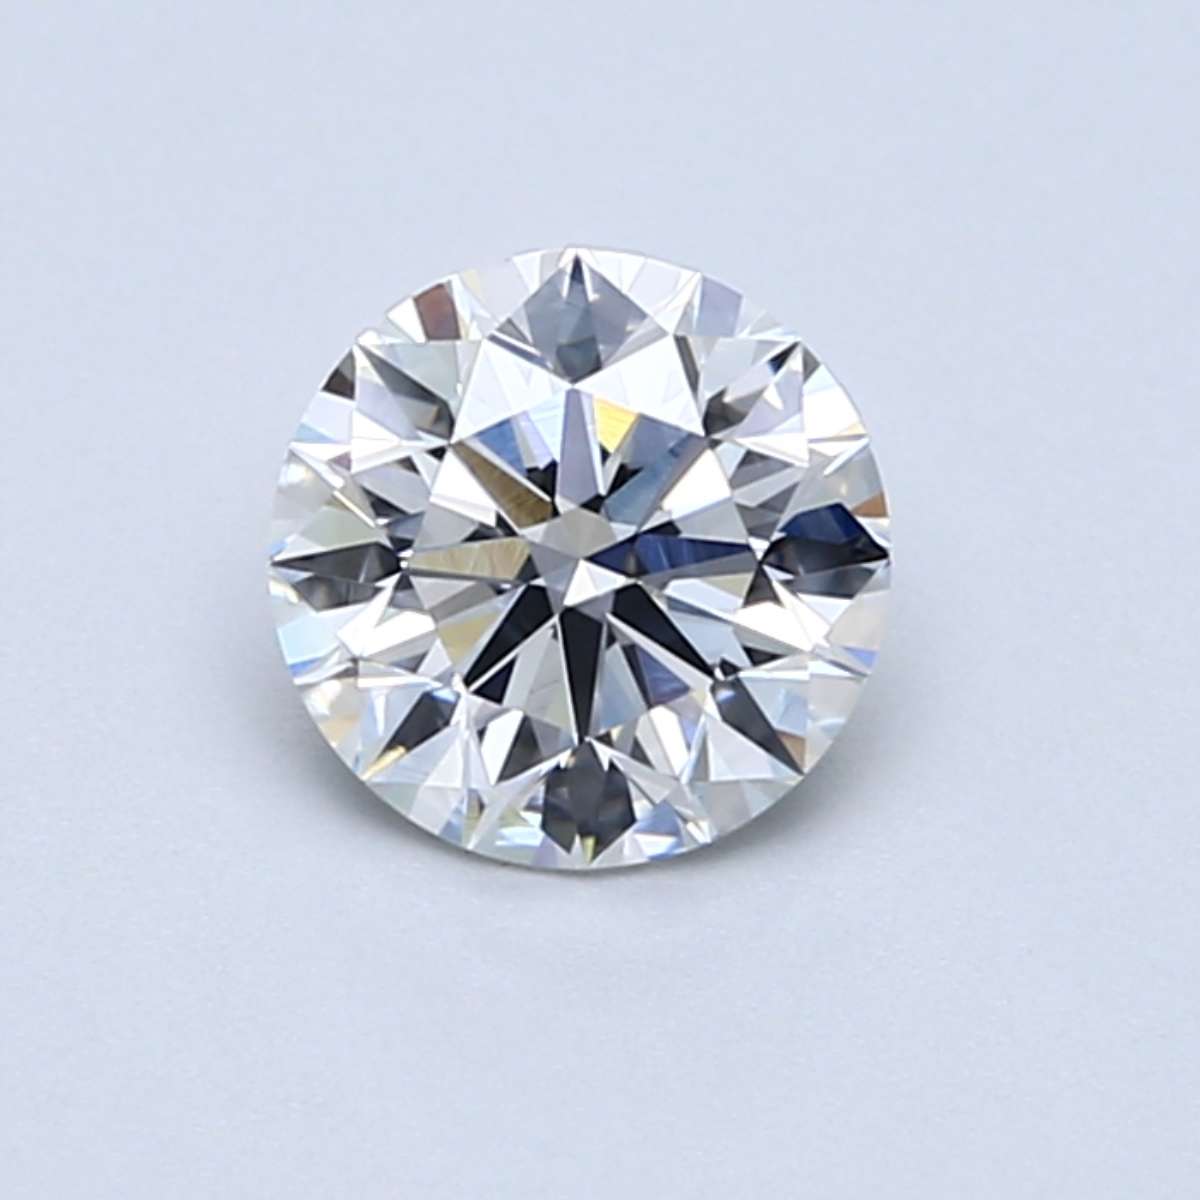 Round 0.86 Carat G Color VS2 Clarity For Sale